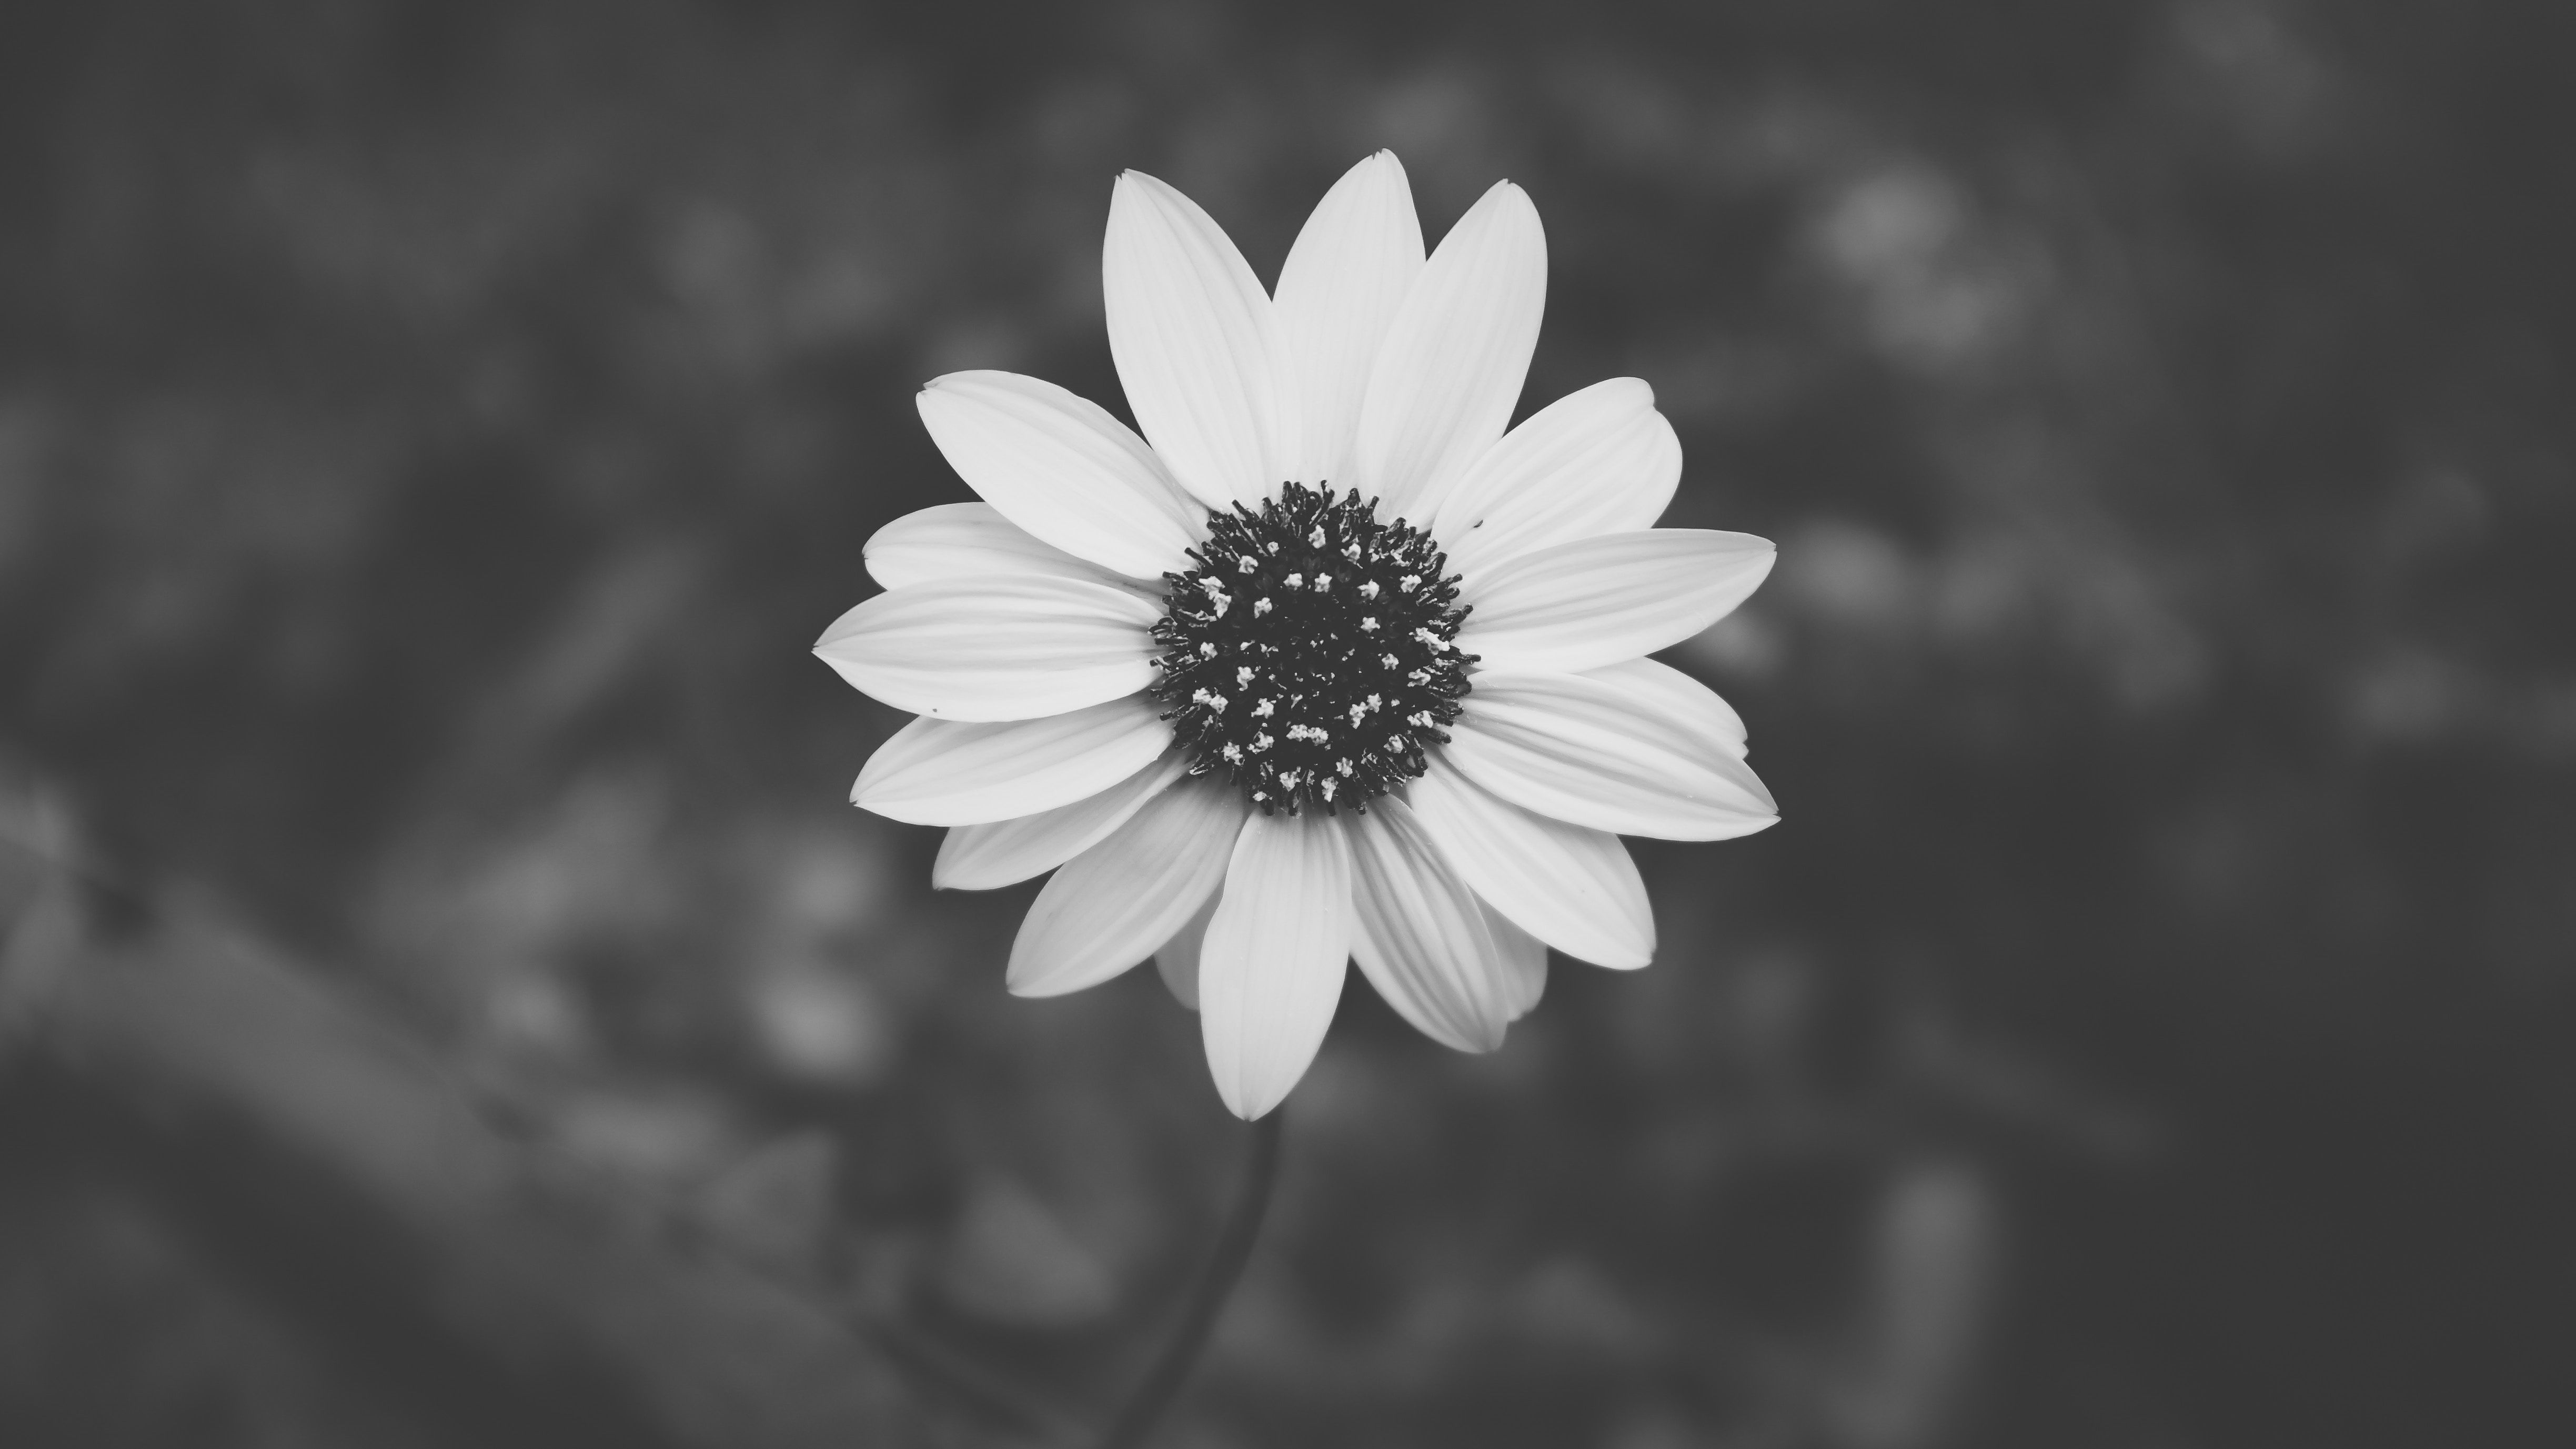 Black And White Aesthetic Wallpaper & Background